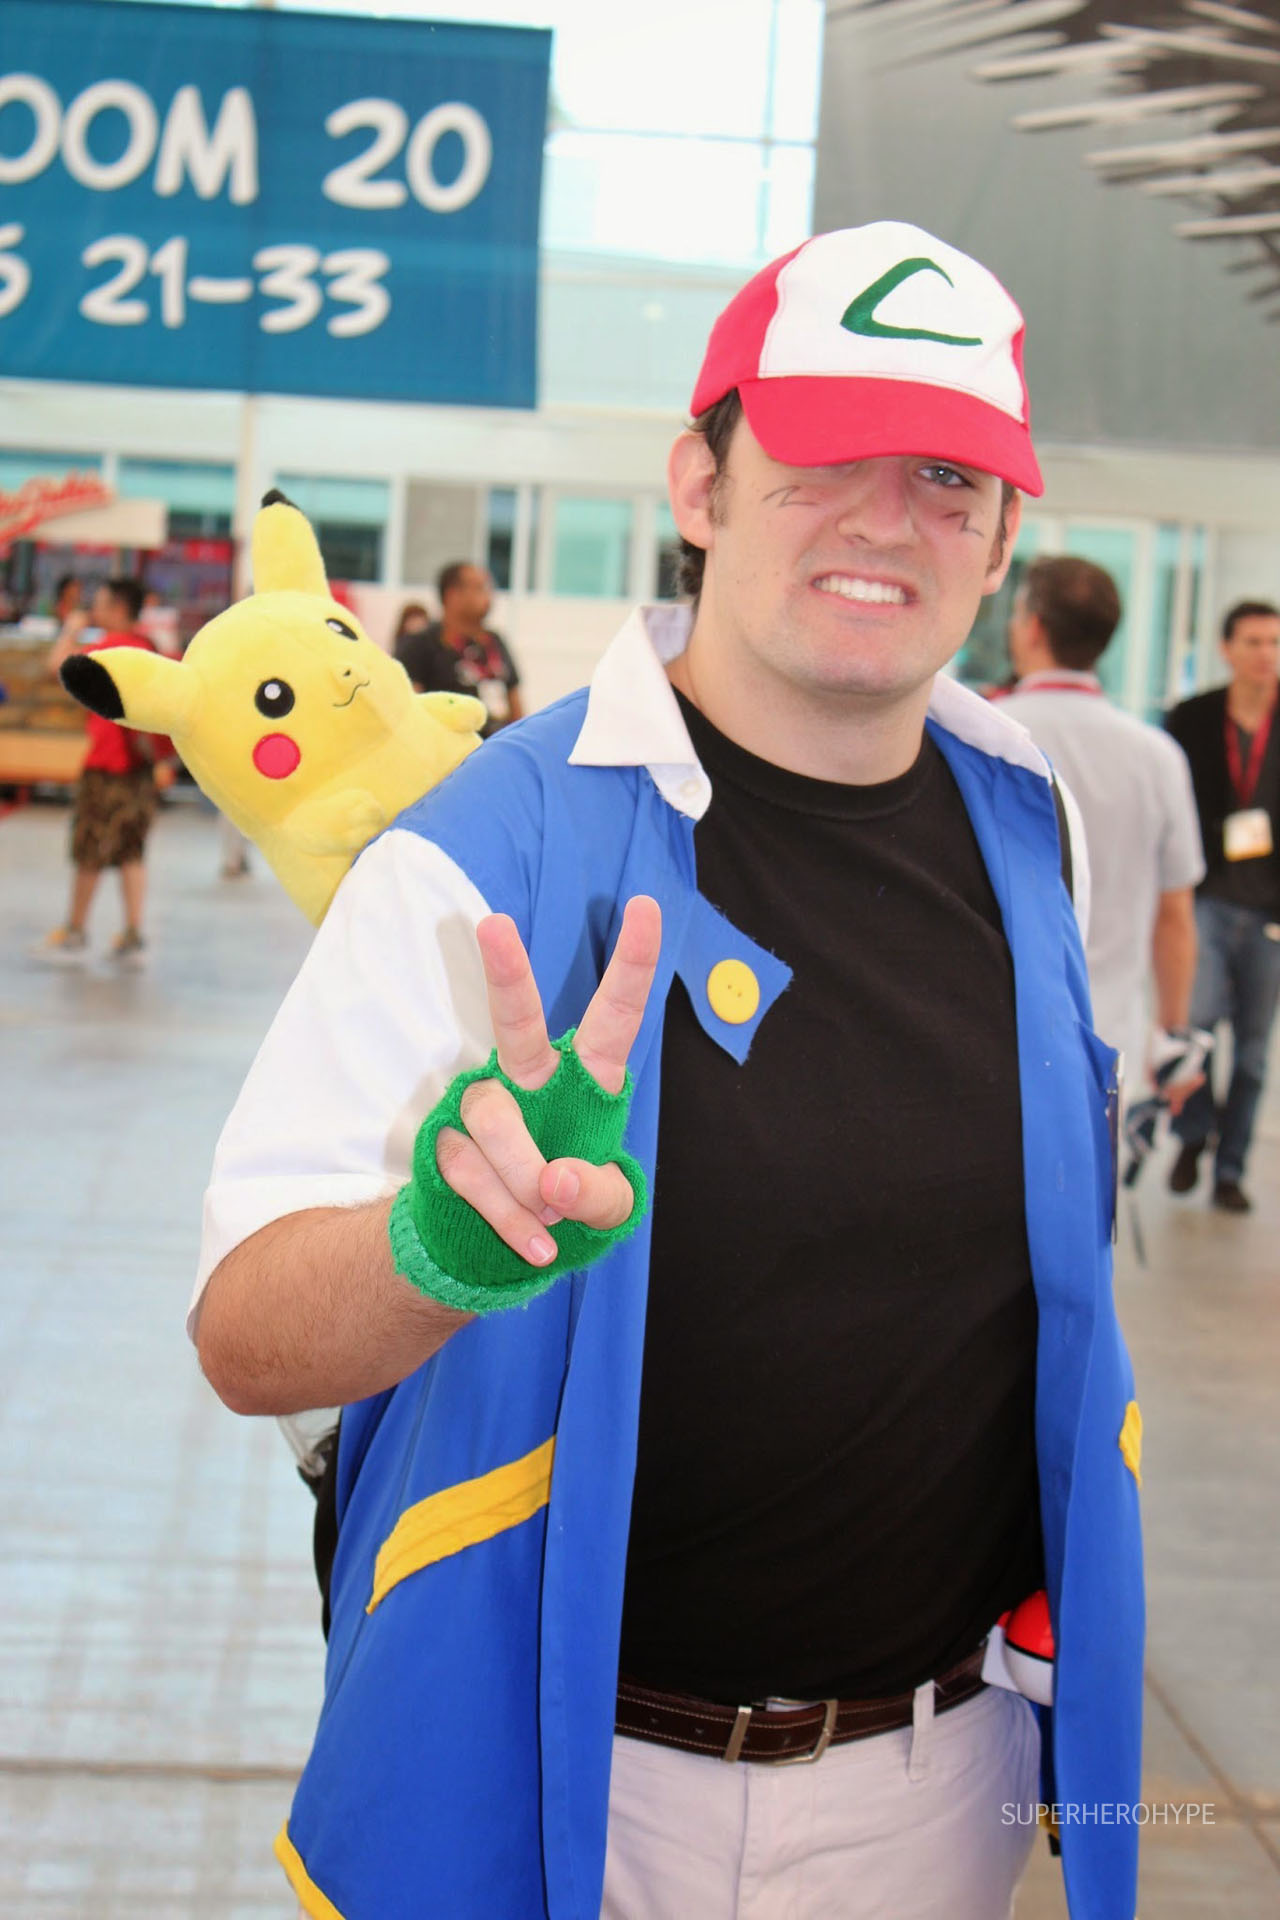 Comic-Con: Check Out New Cosplay Photos from San Diego! - Comic Book ...